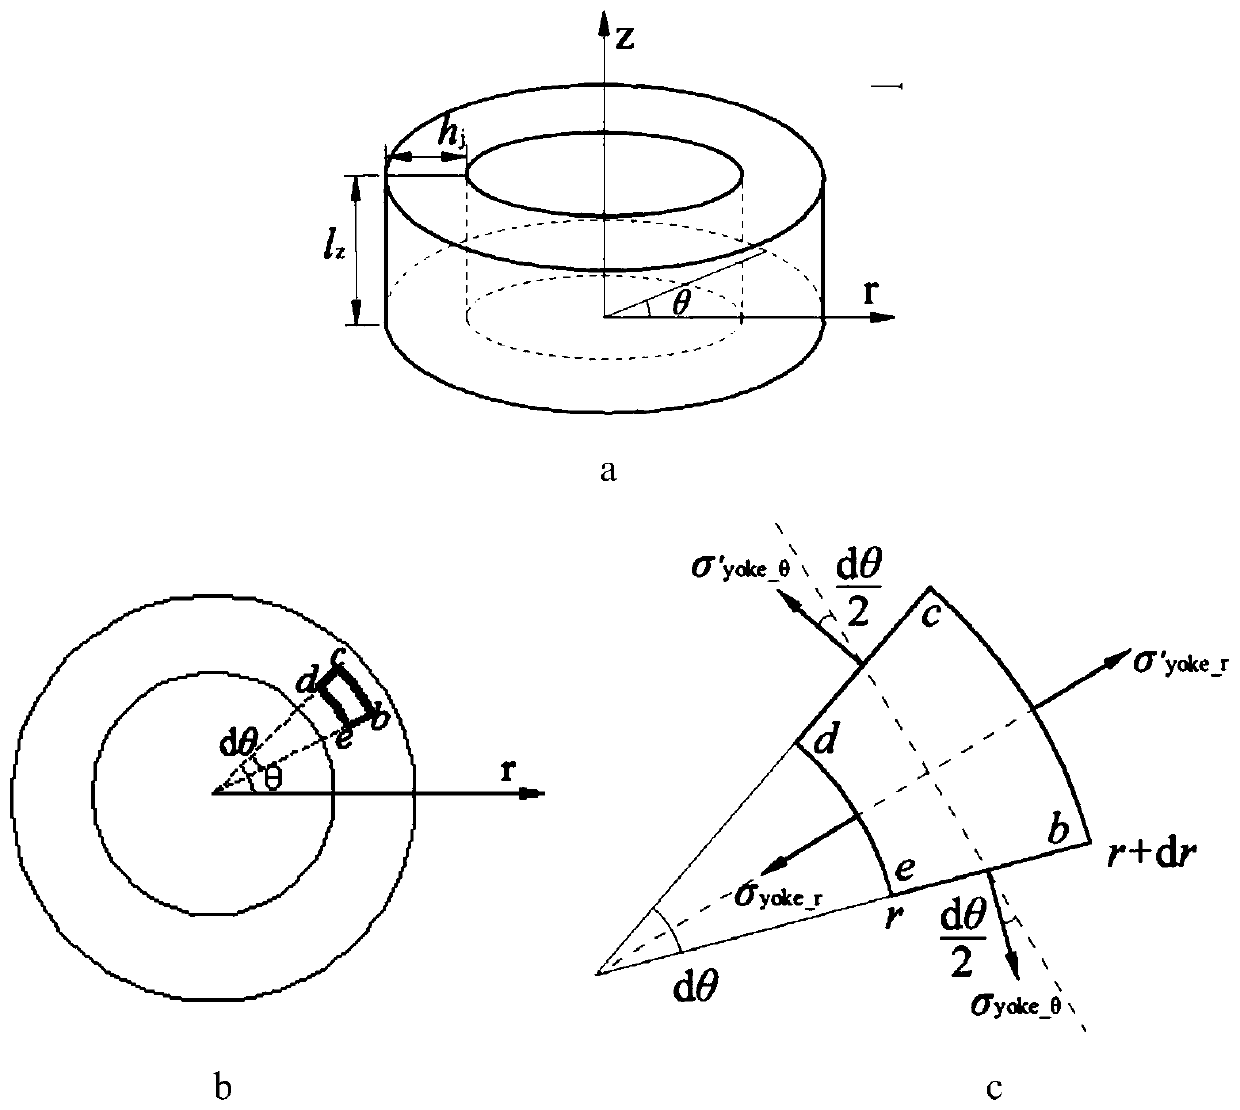 Improved Analytical Model of Motor Stator Core Vibration Caused by Magnetostriction